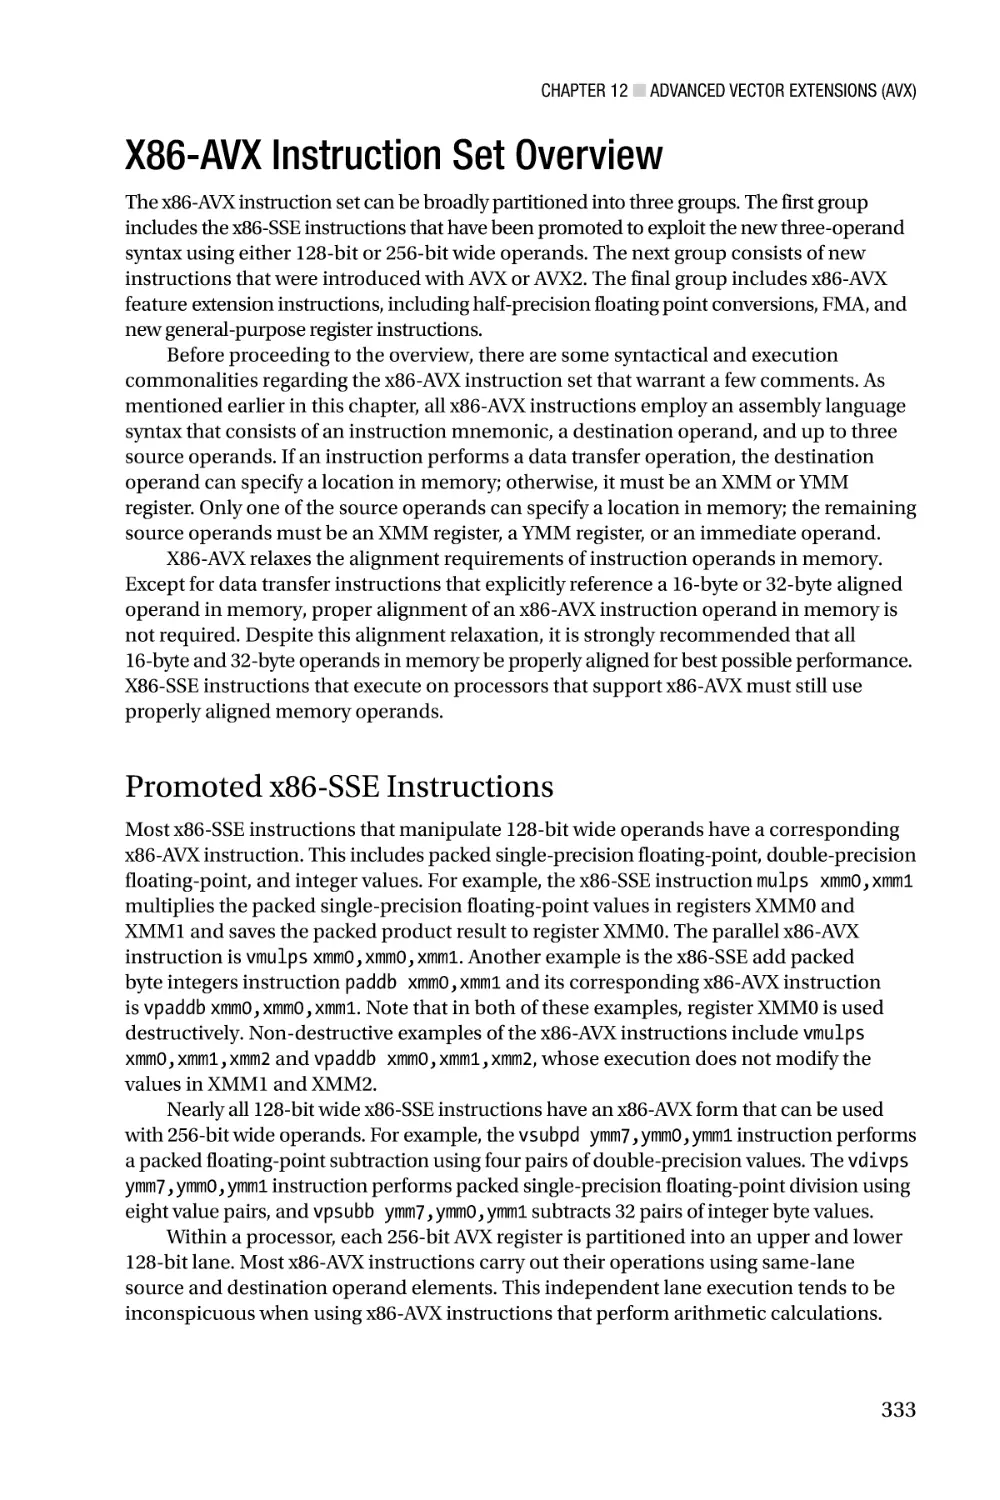 X86-AVX Instruction Set Overview
Promoted x86-SSE Instructions